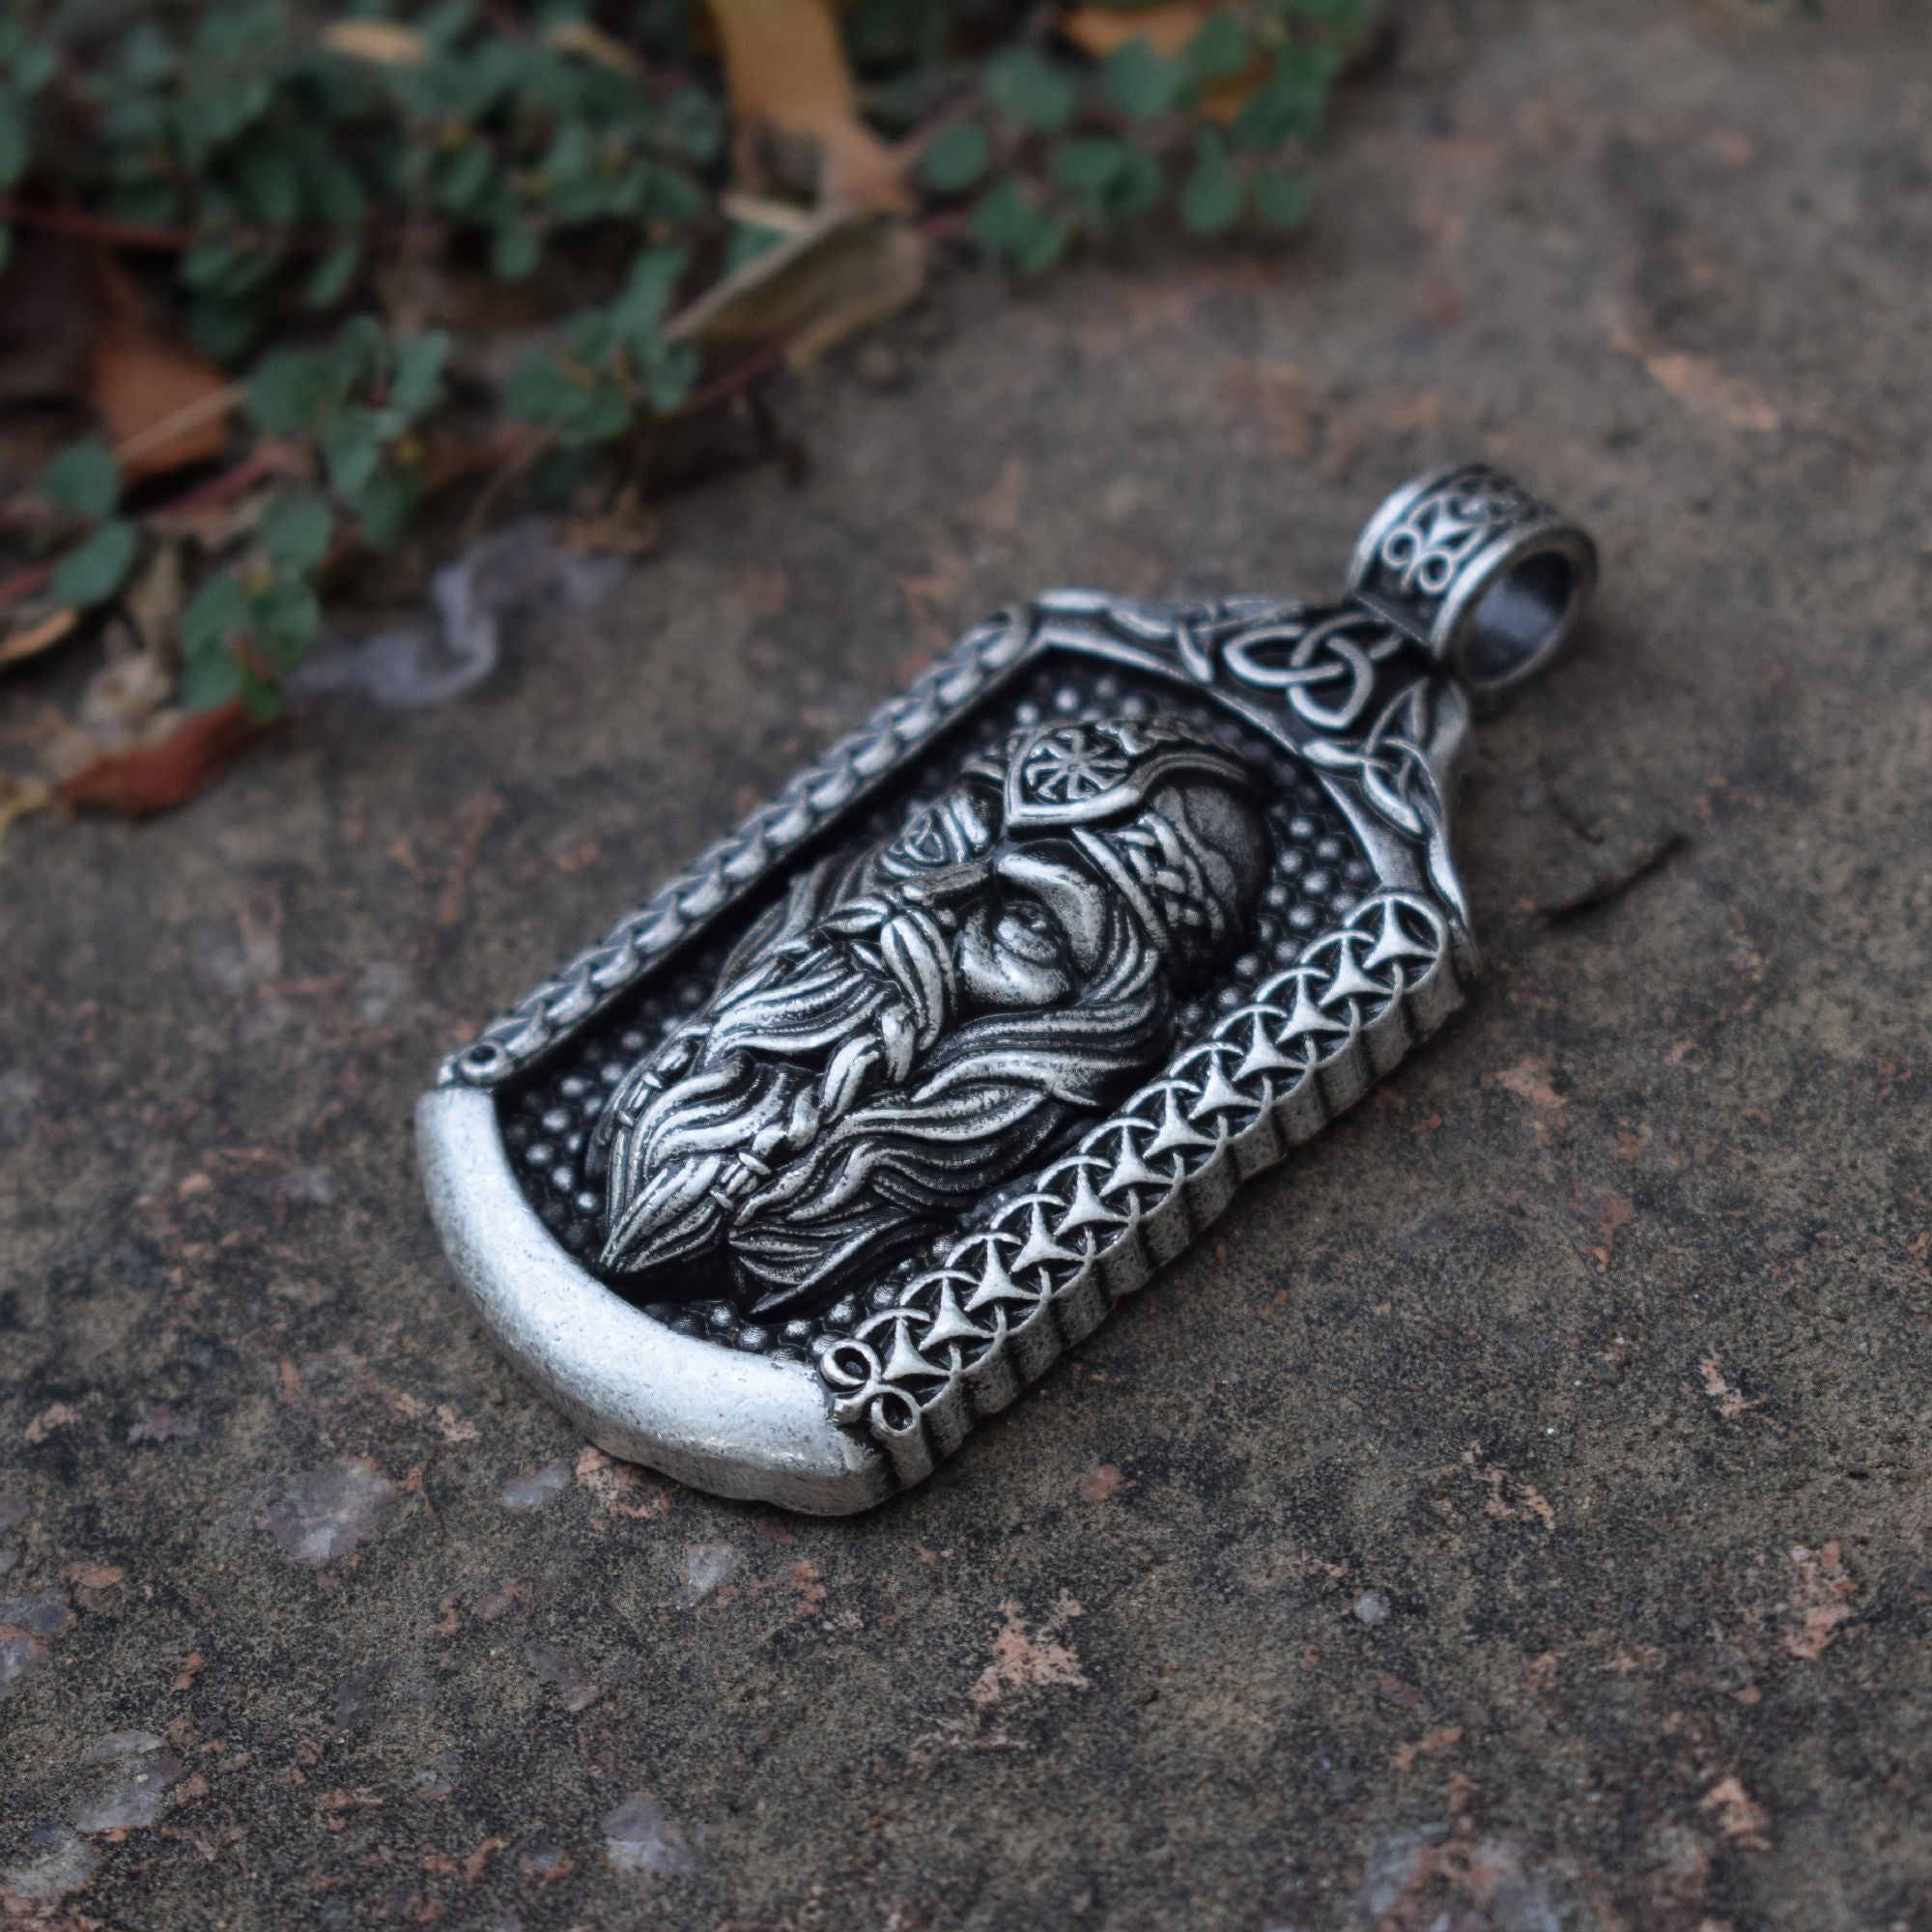 The All-father Odin Necklace